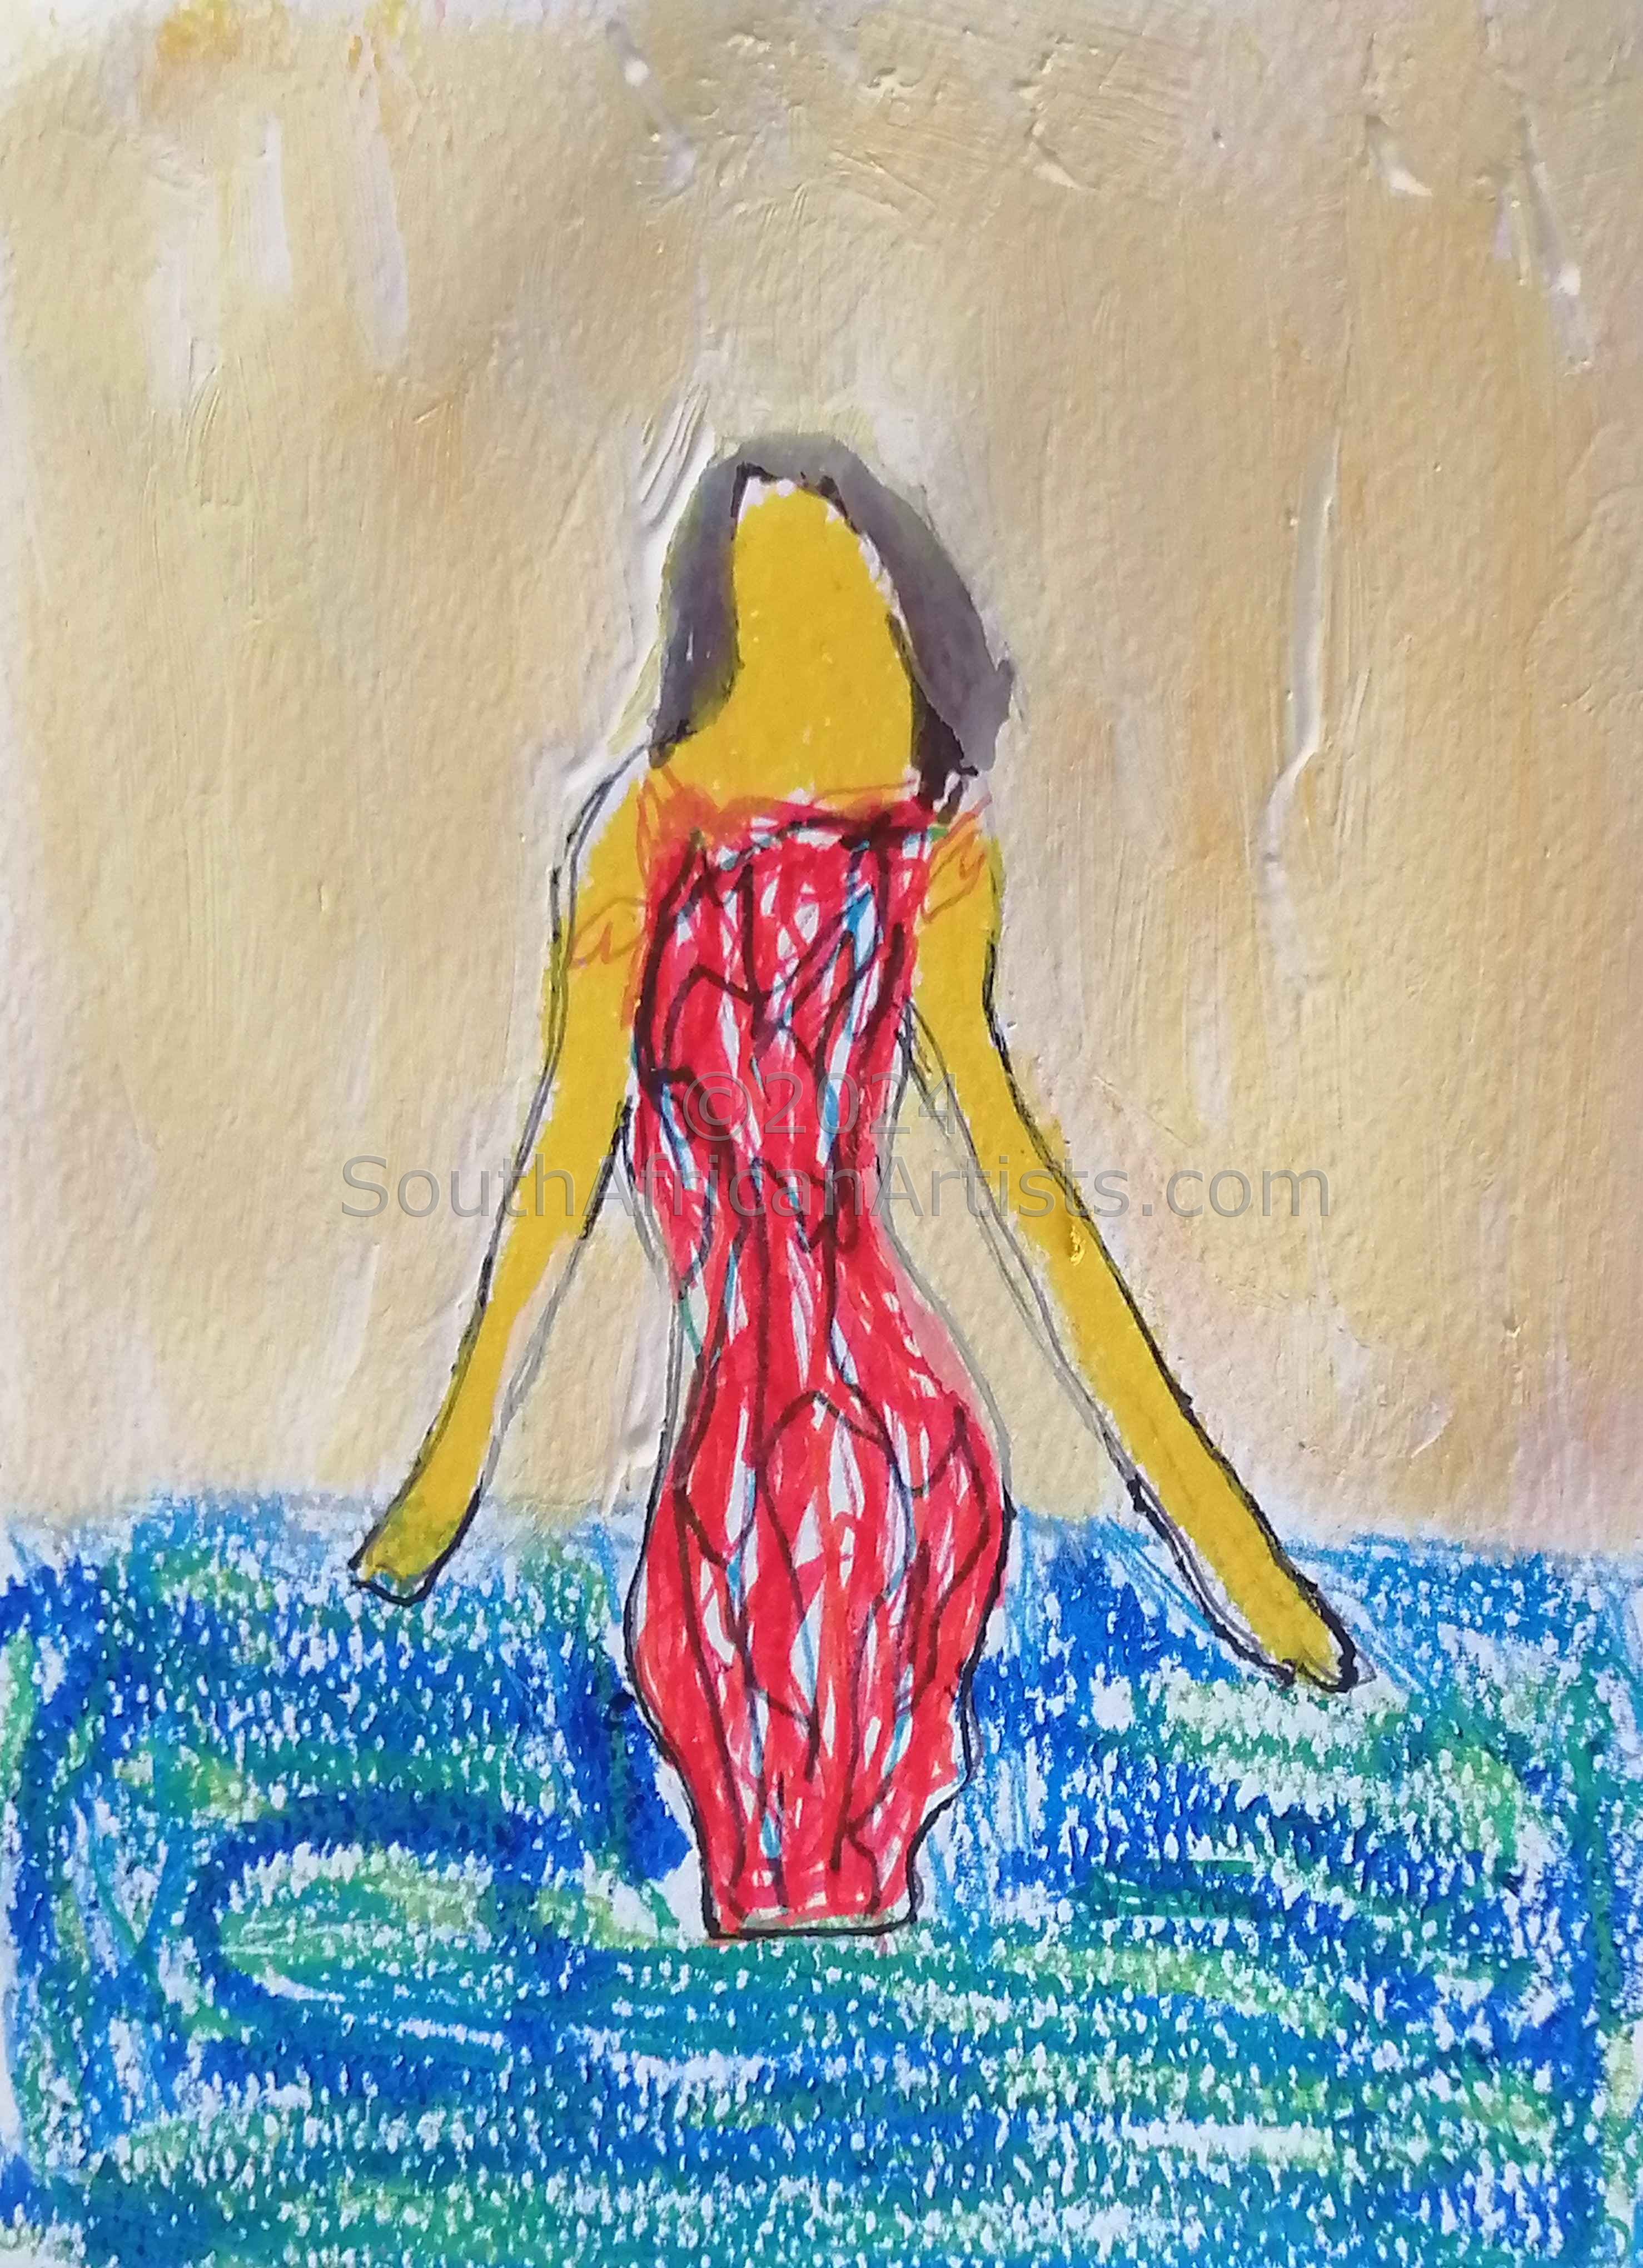 The Red Dress Lady in the Water